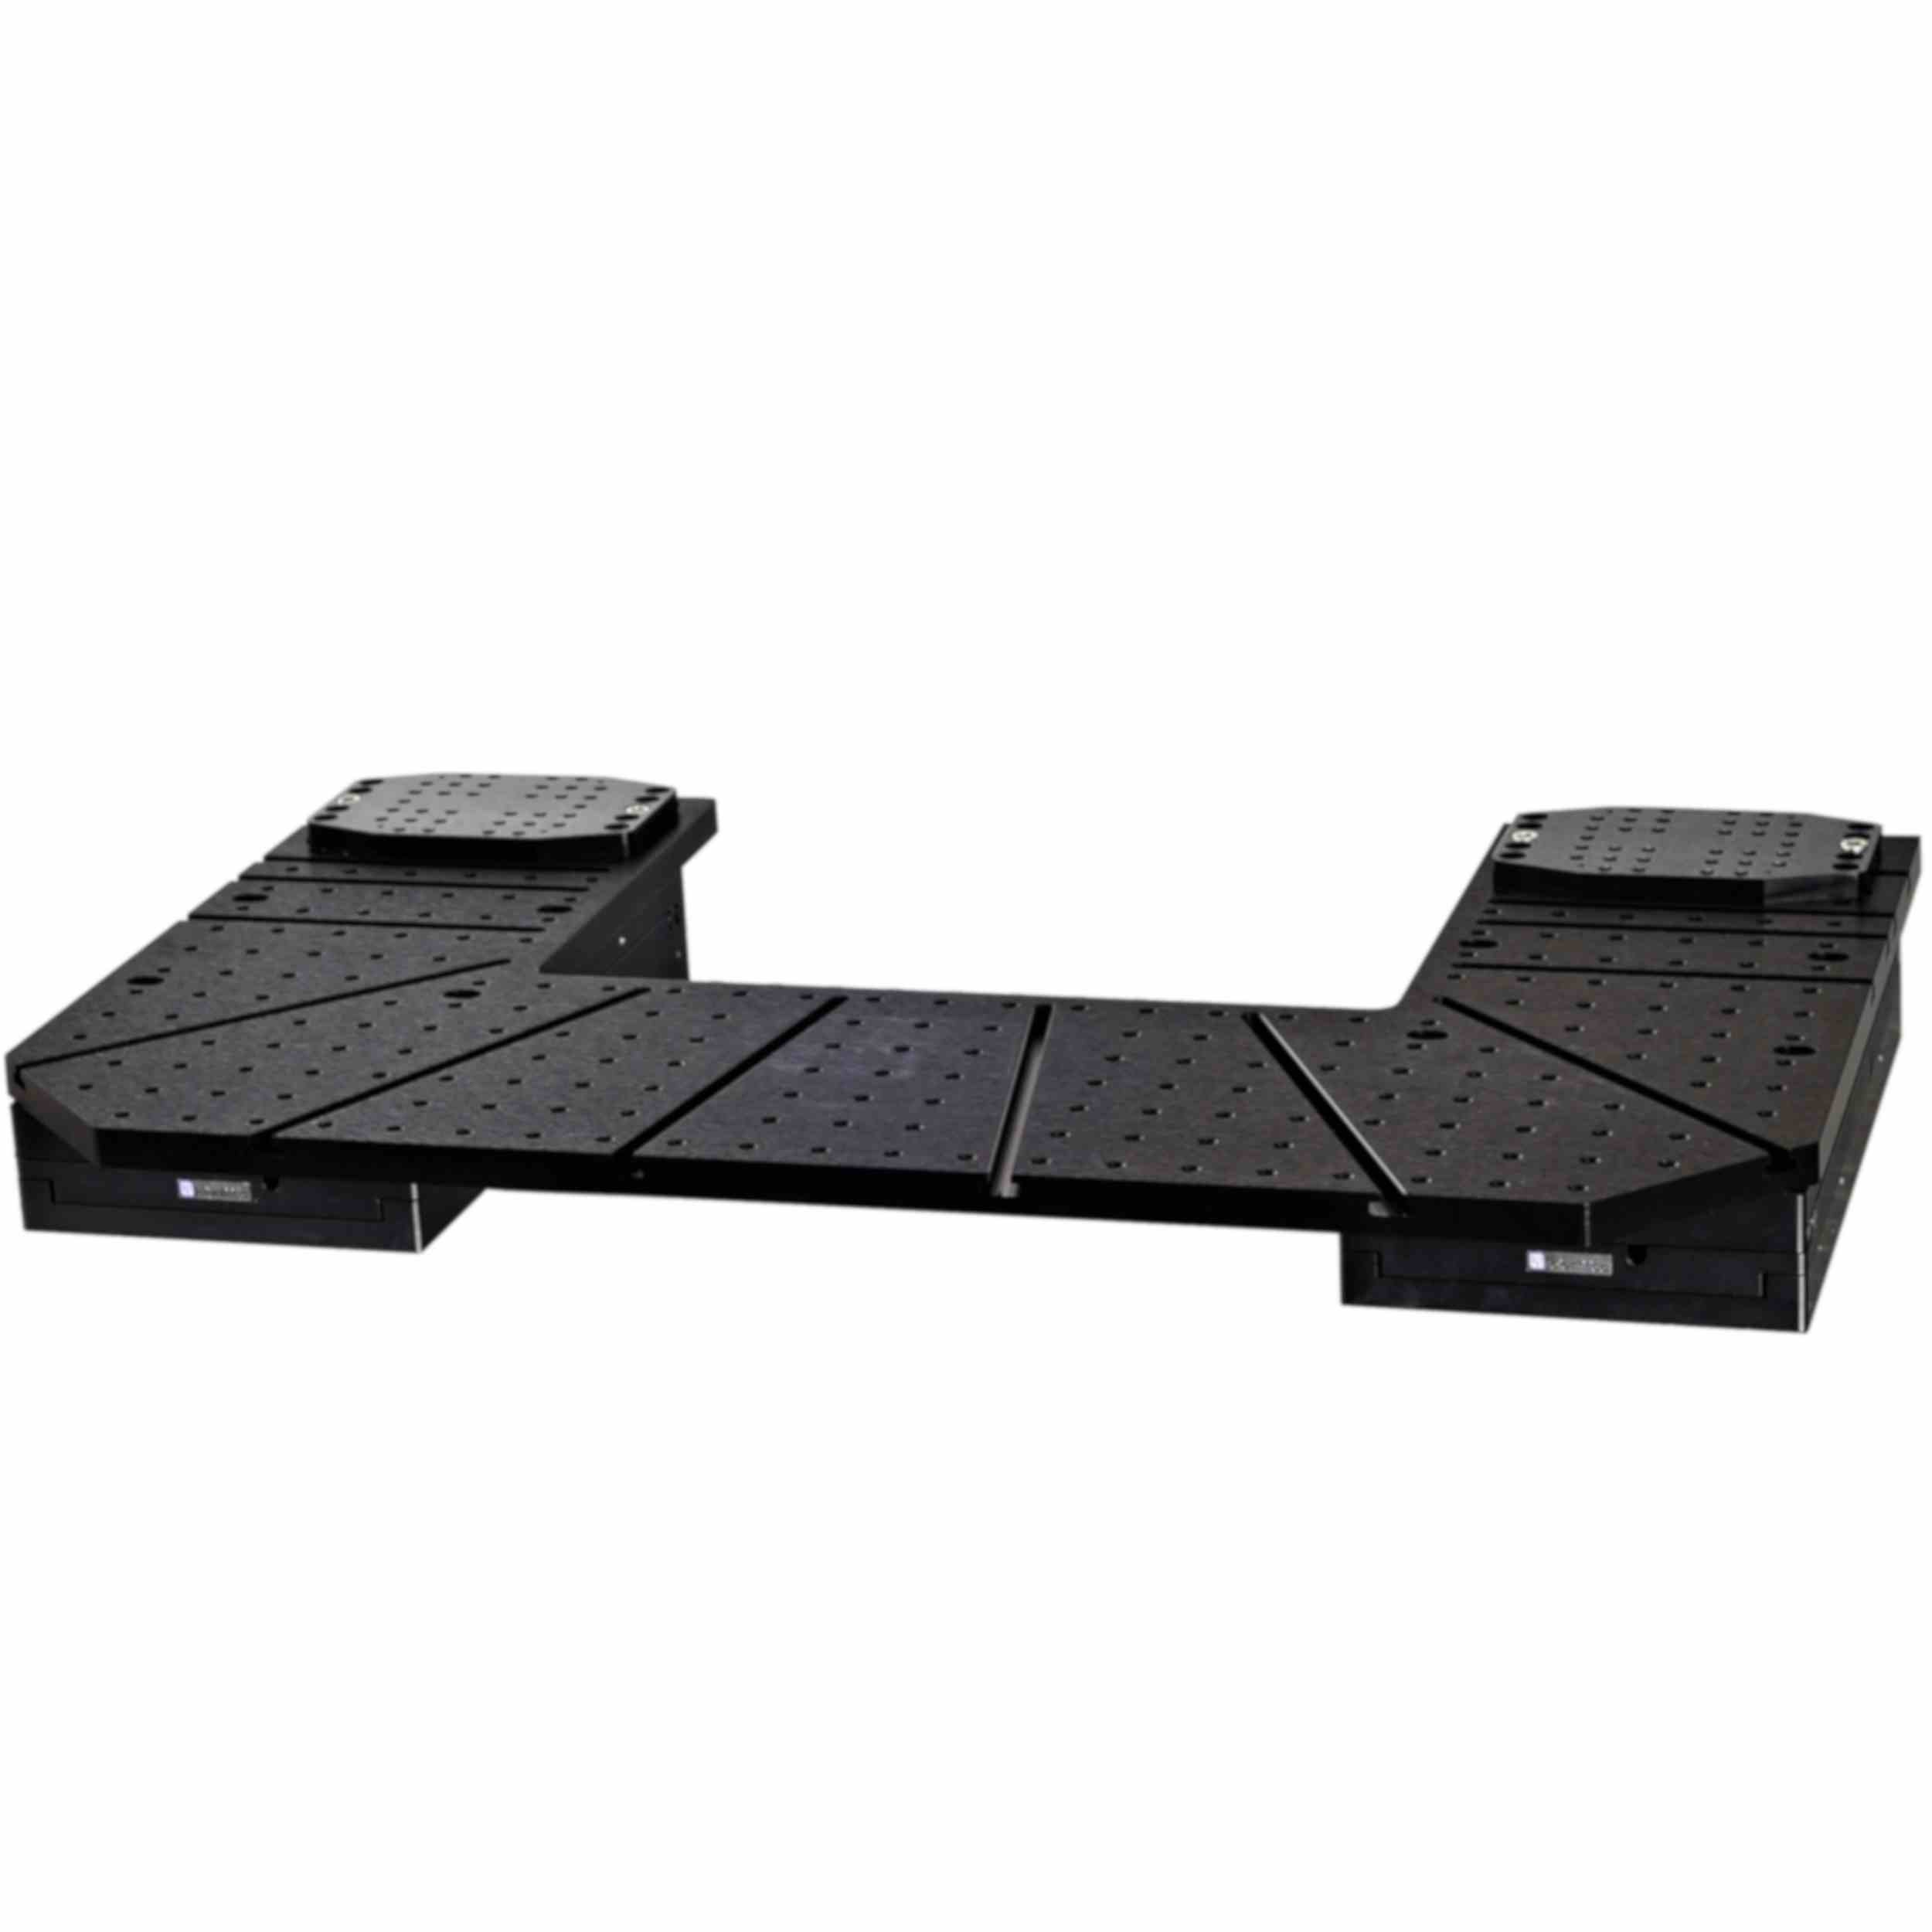 Scientifica Motorised Movable Base Plate (MMBP)